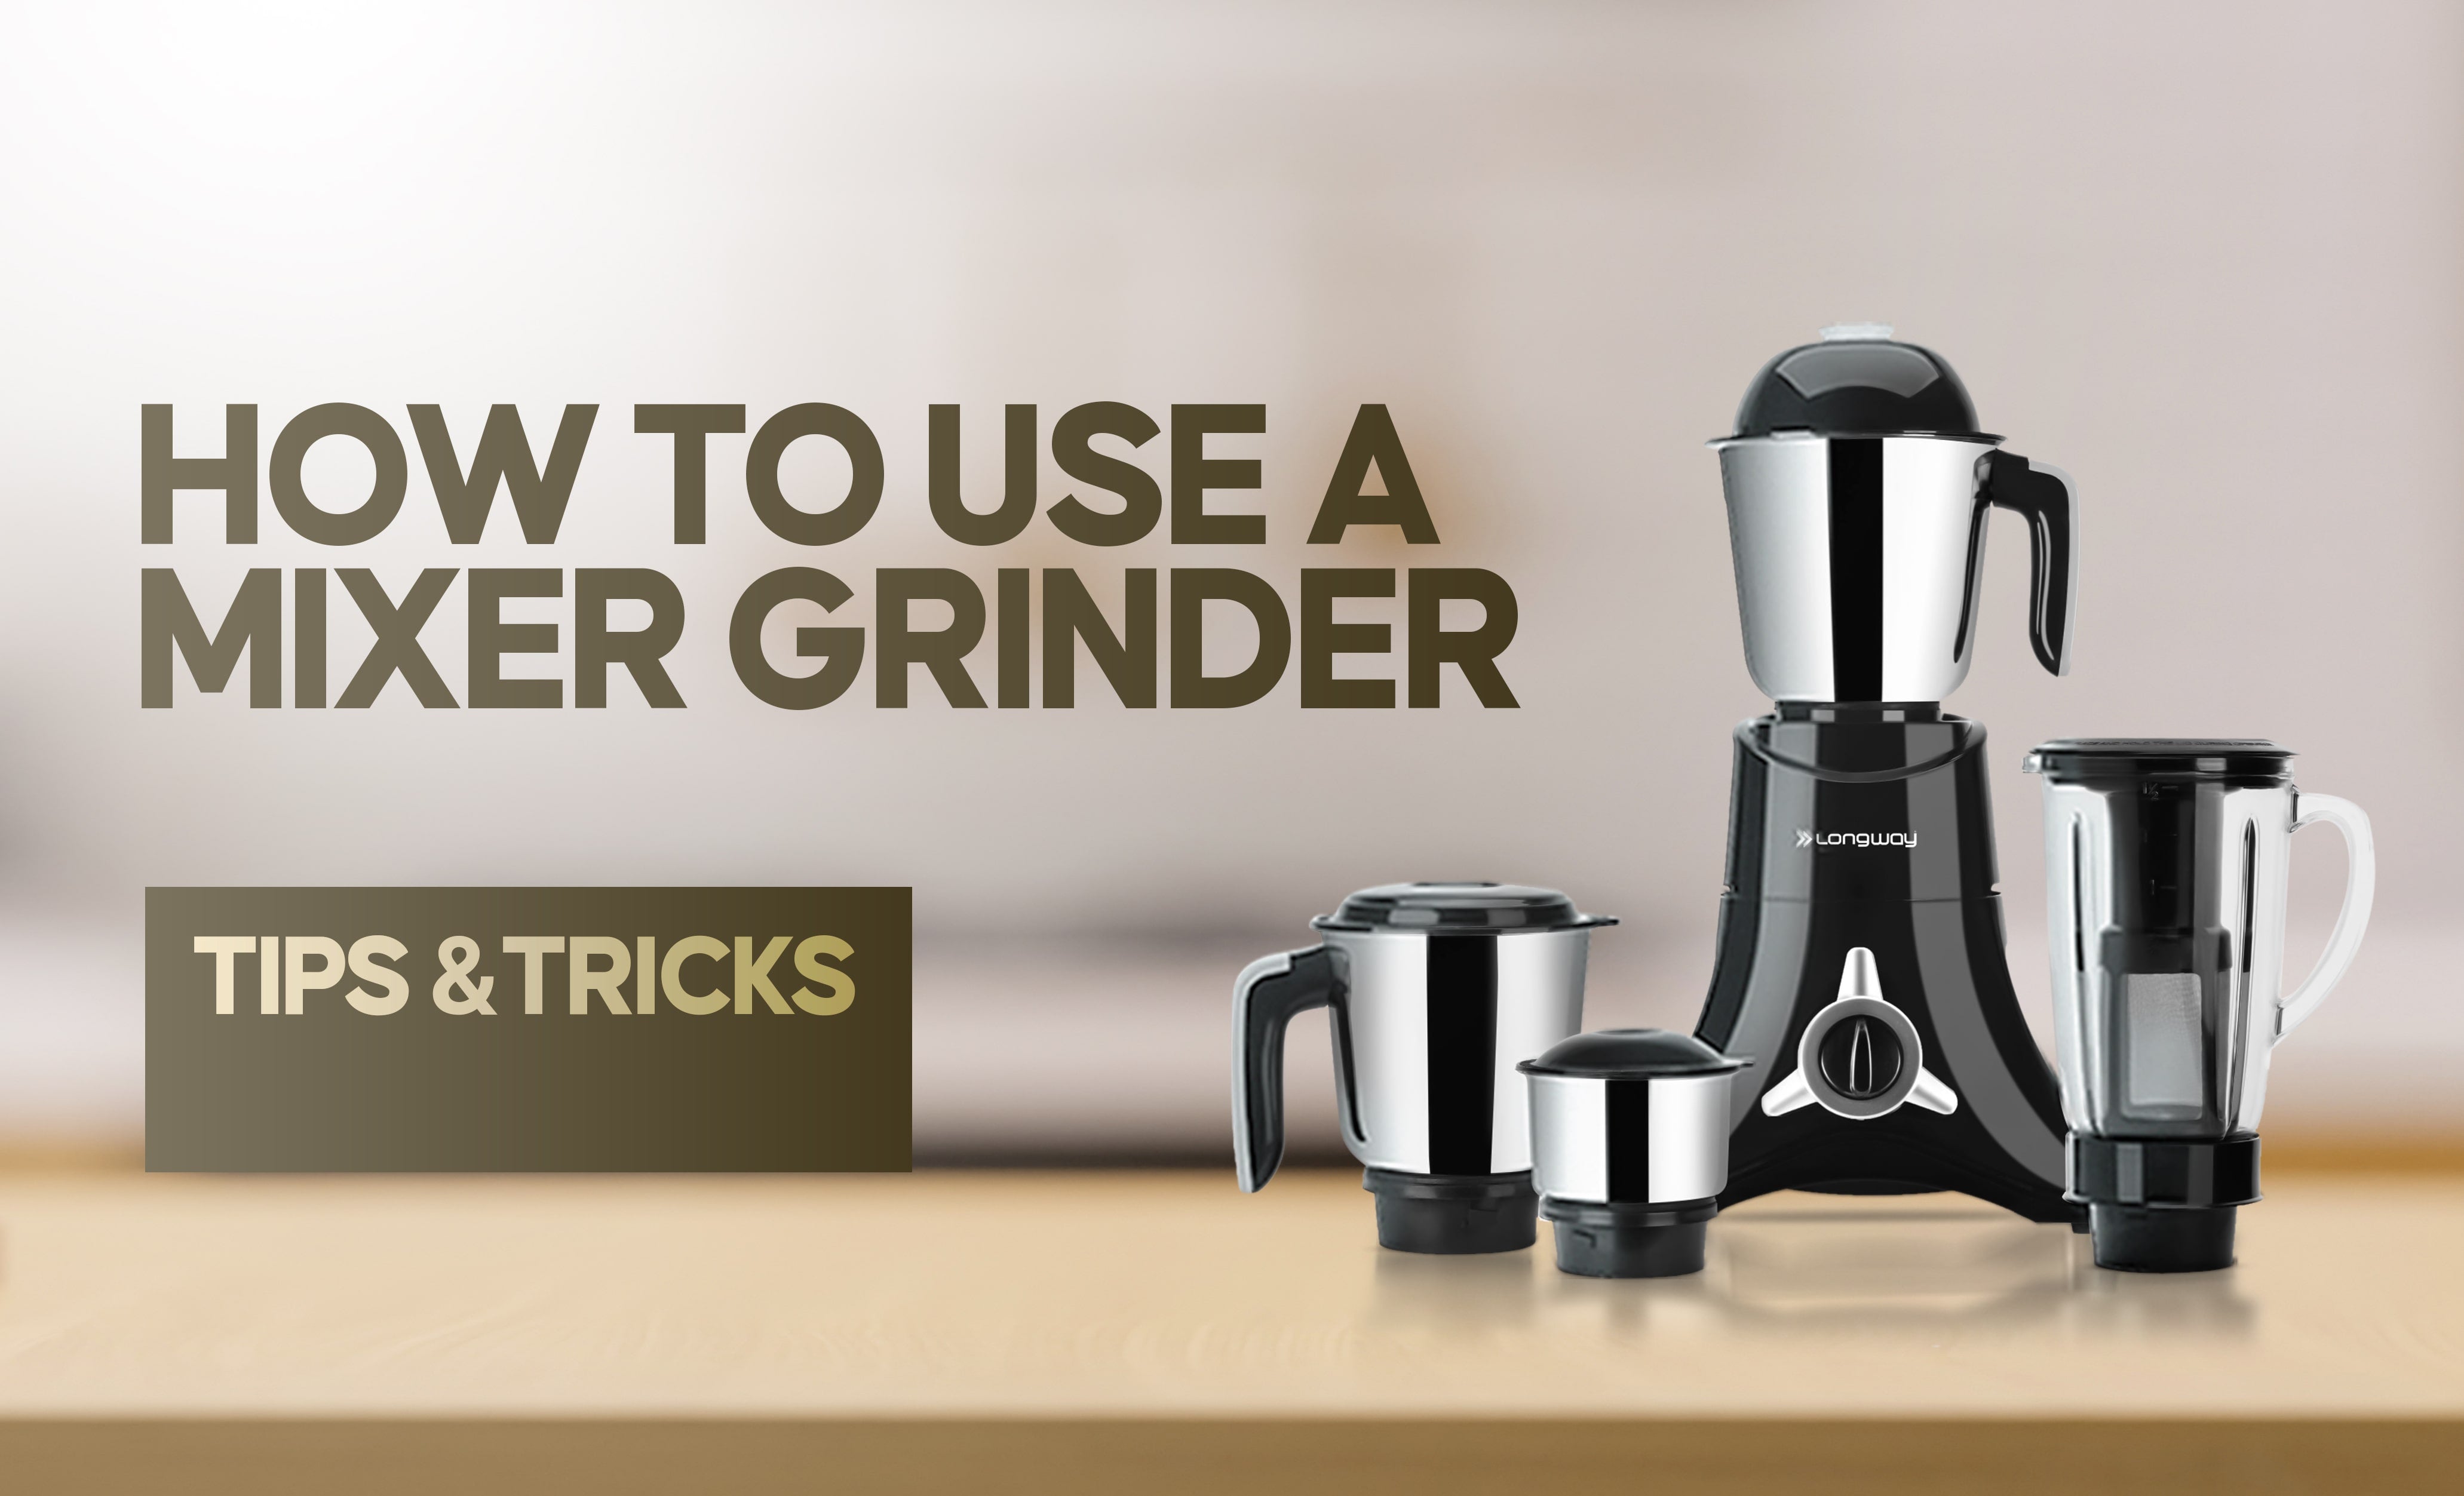 How To Maintain Your Mixer Grinder: Do's and Don'ts